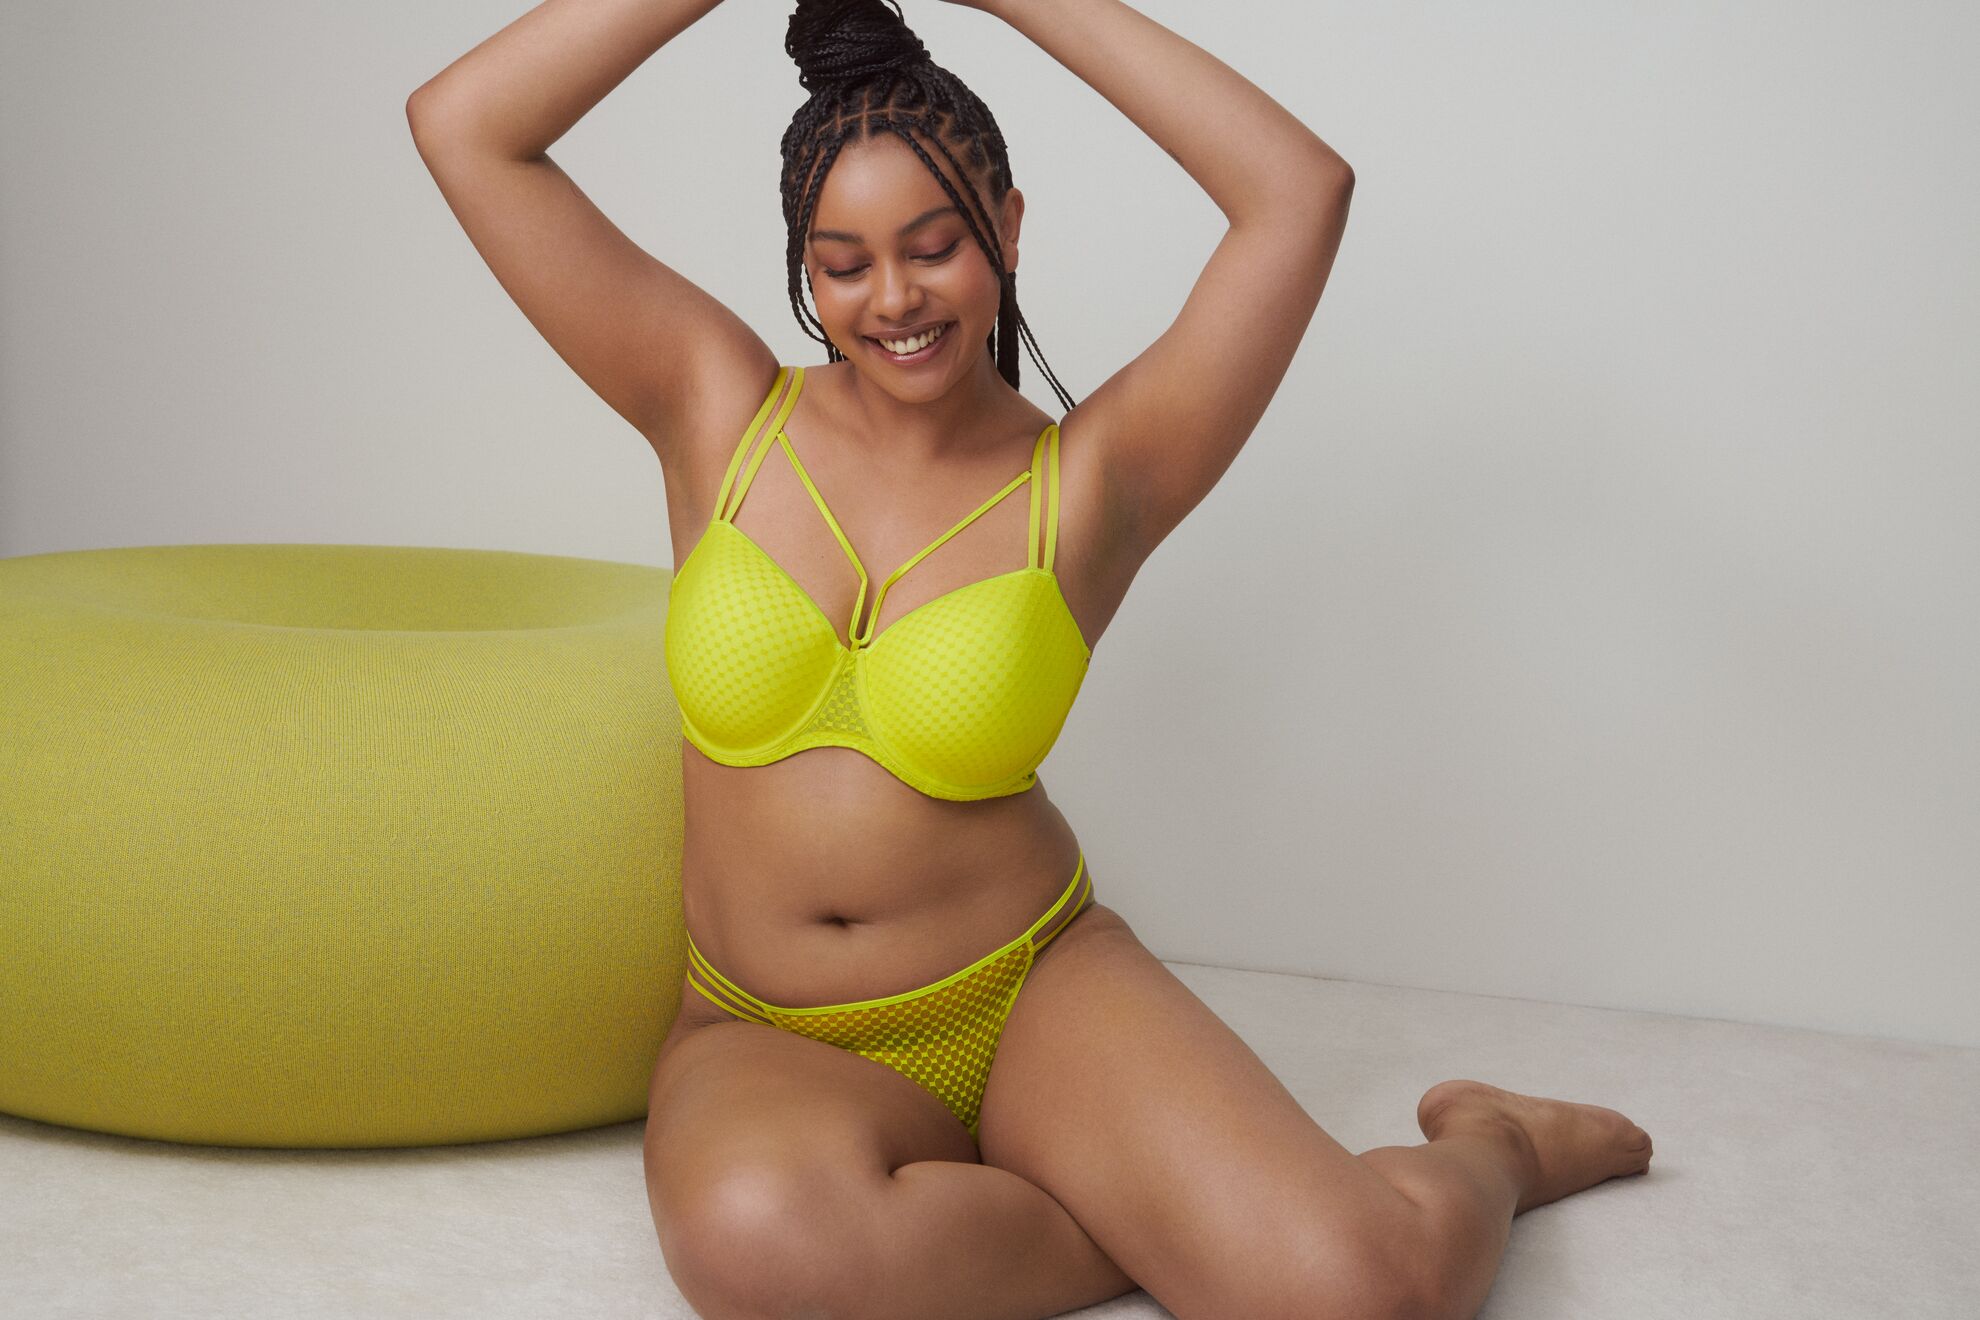 Just My Size: Whatever Your Need, We've Got a Bra for That!